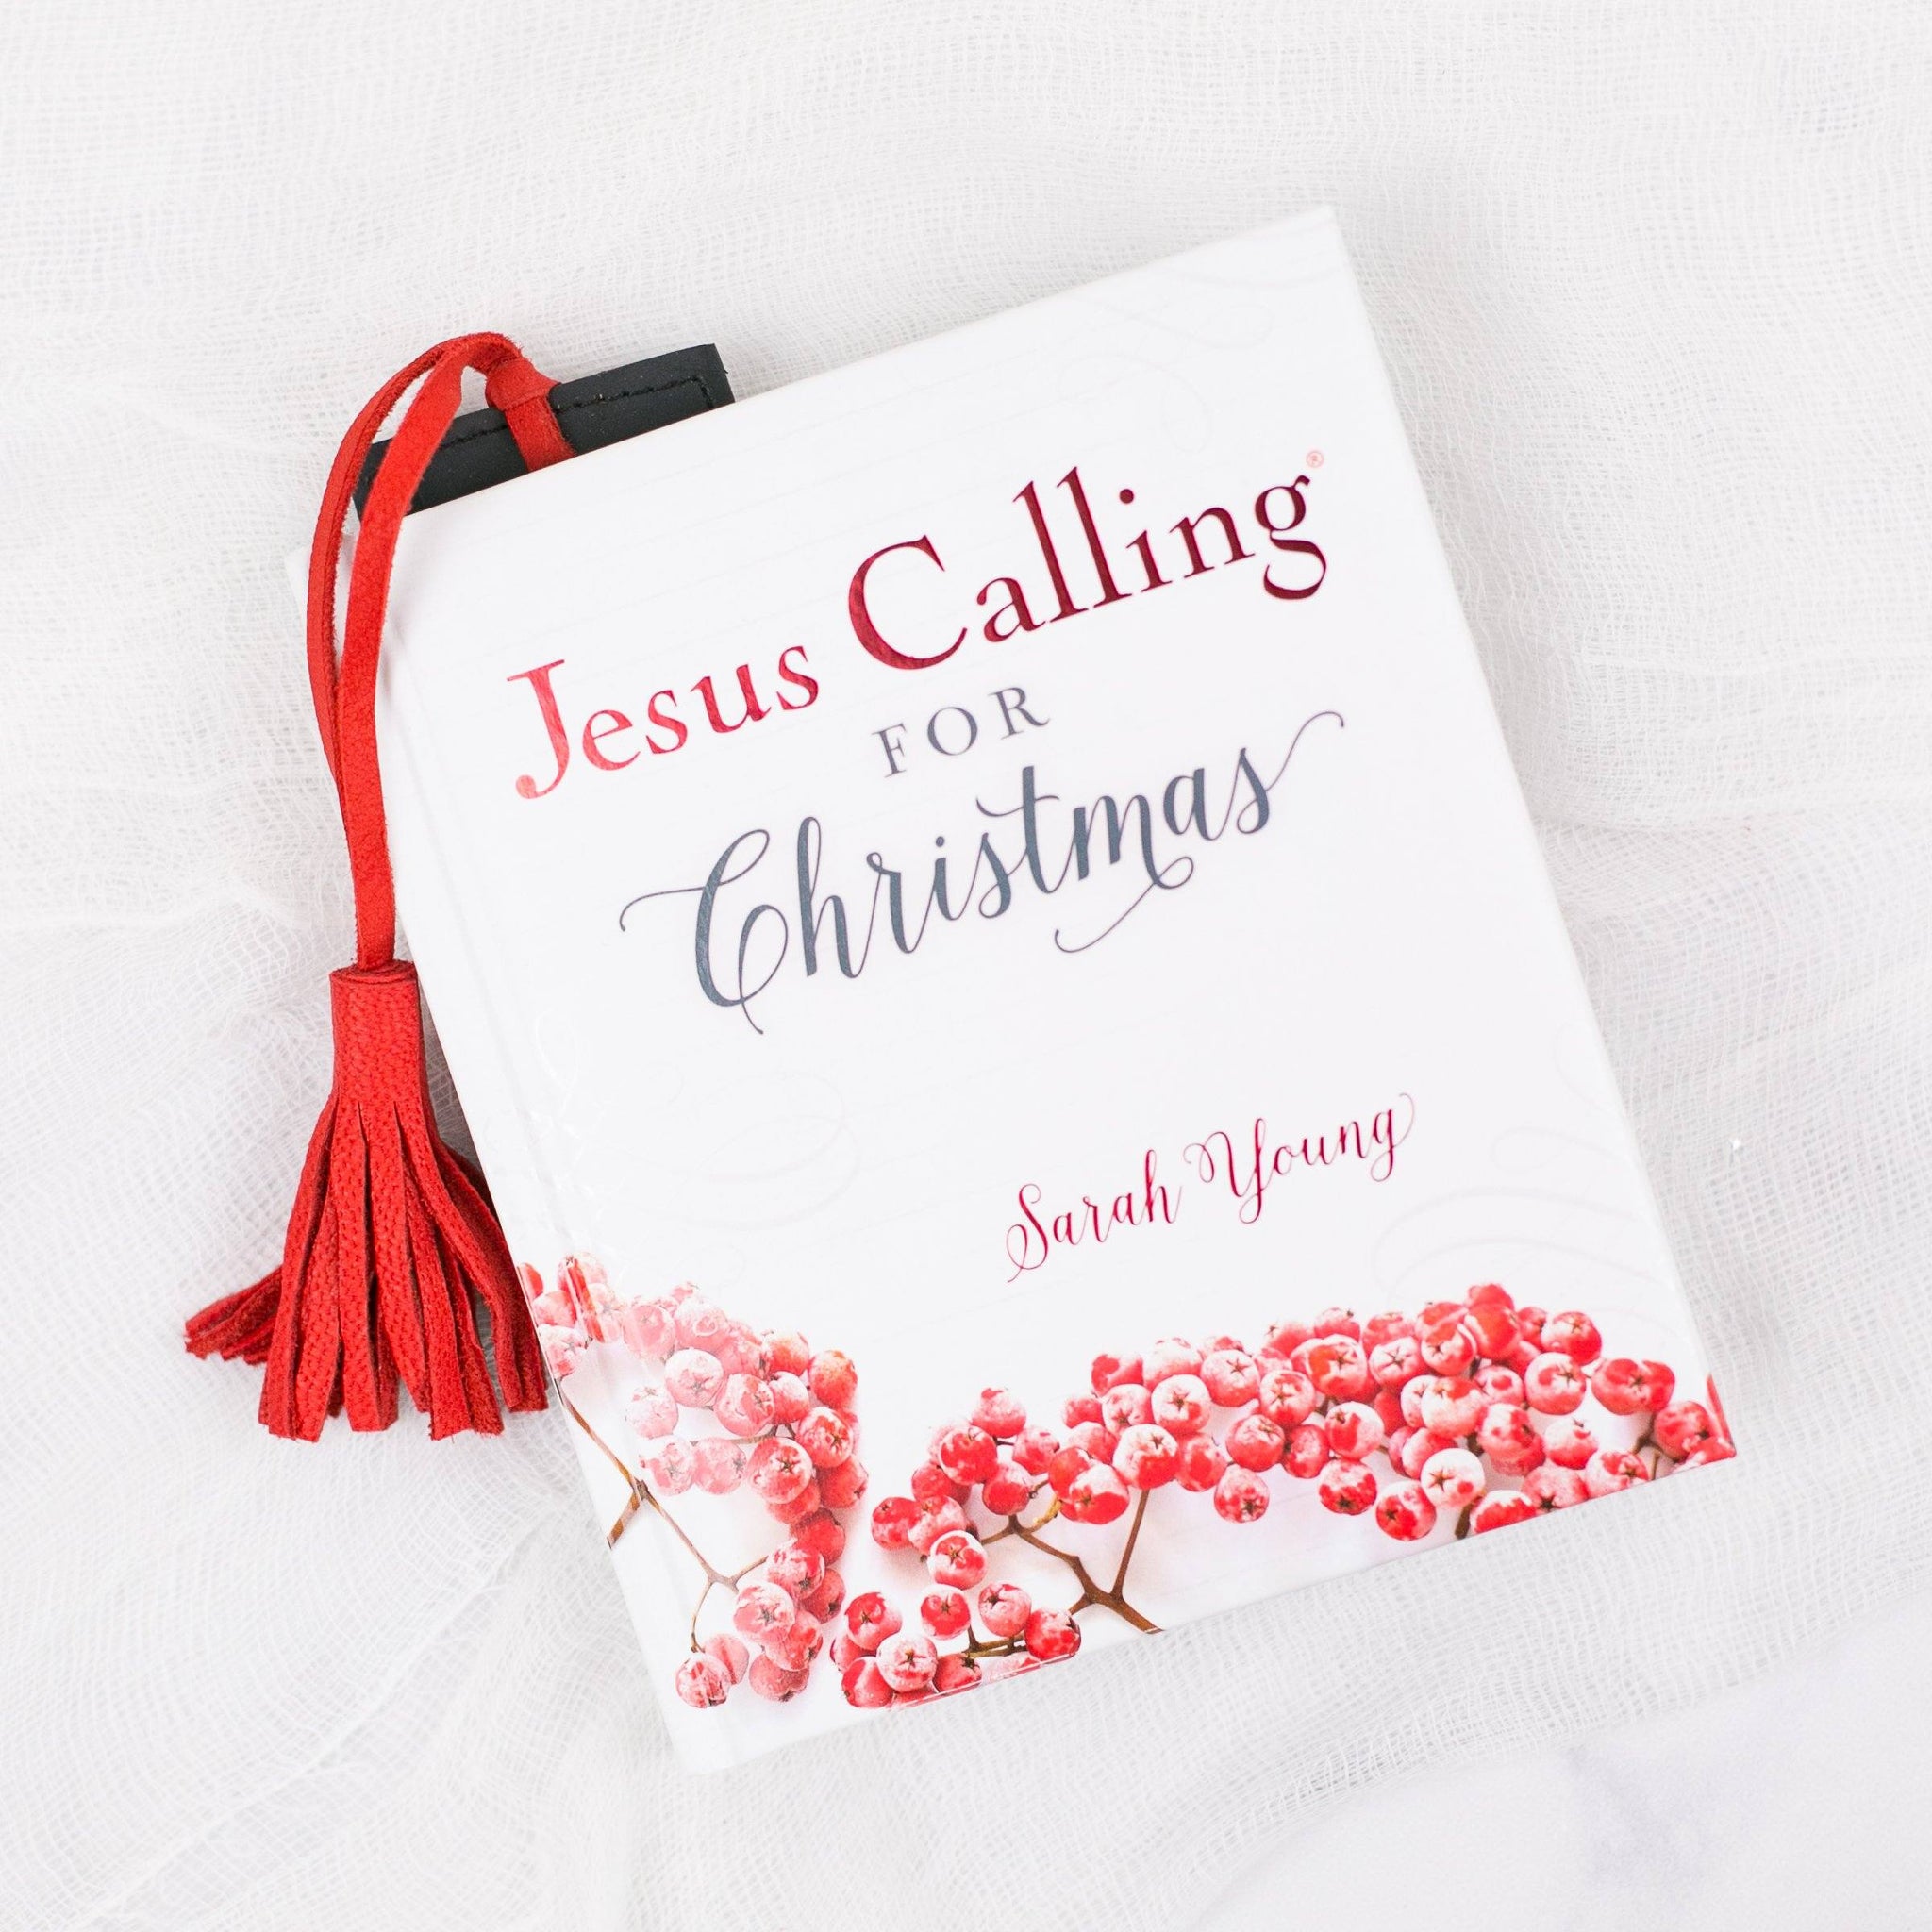 Jesus Calling for Christmas book by Sarah Young